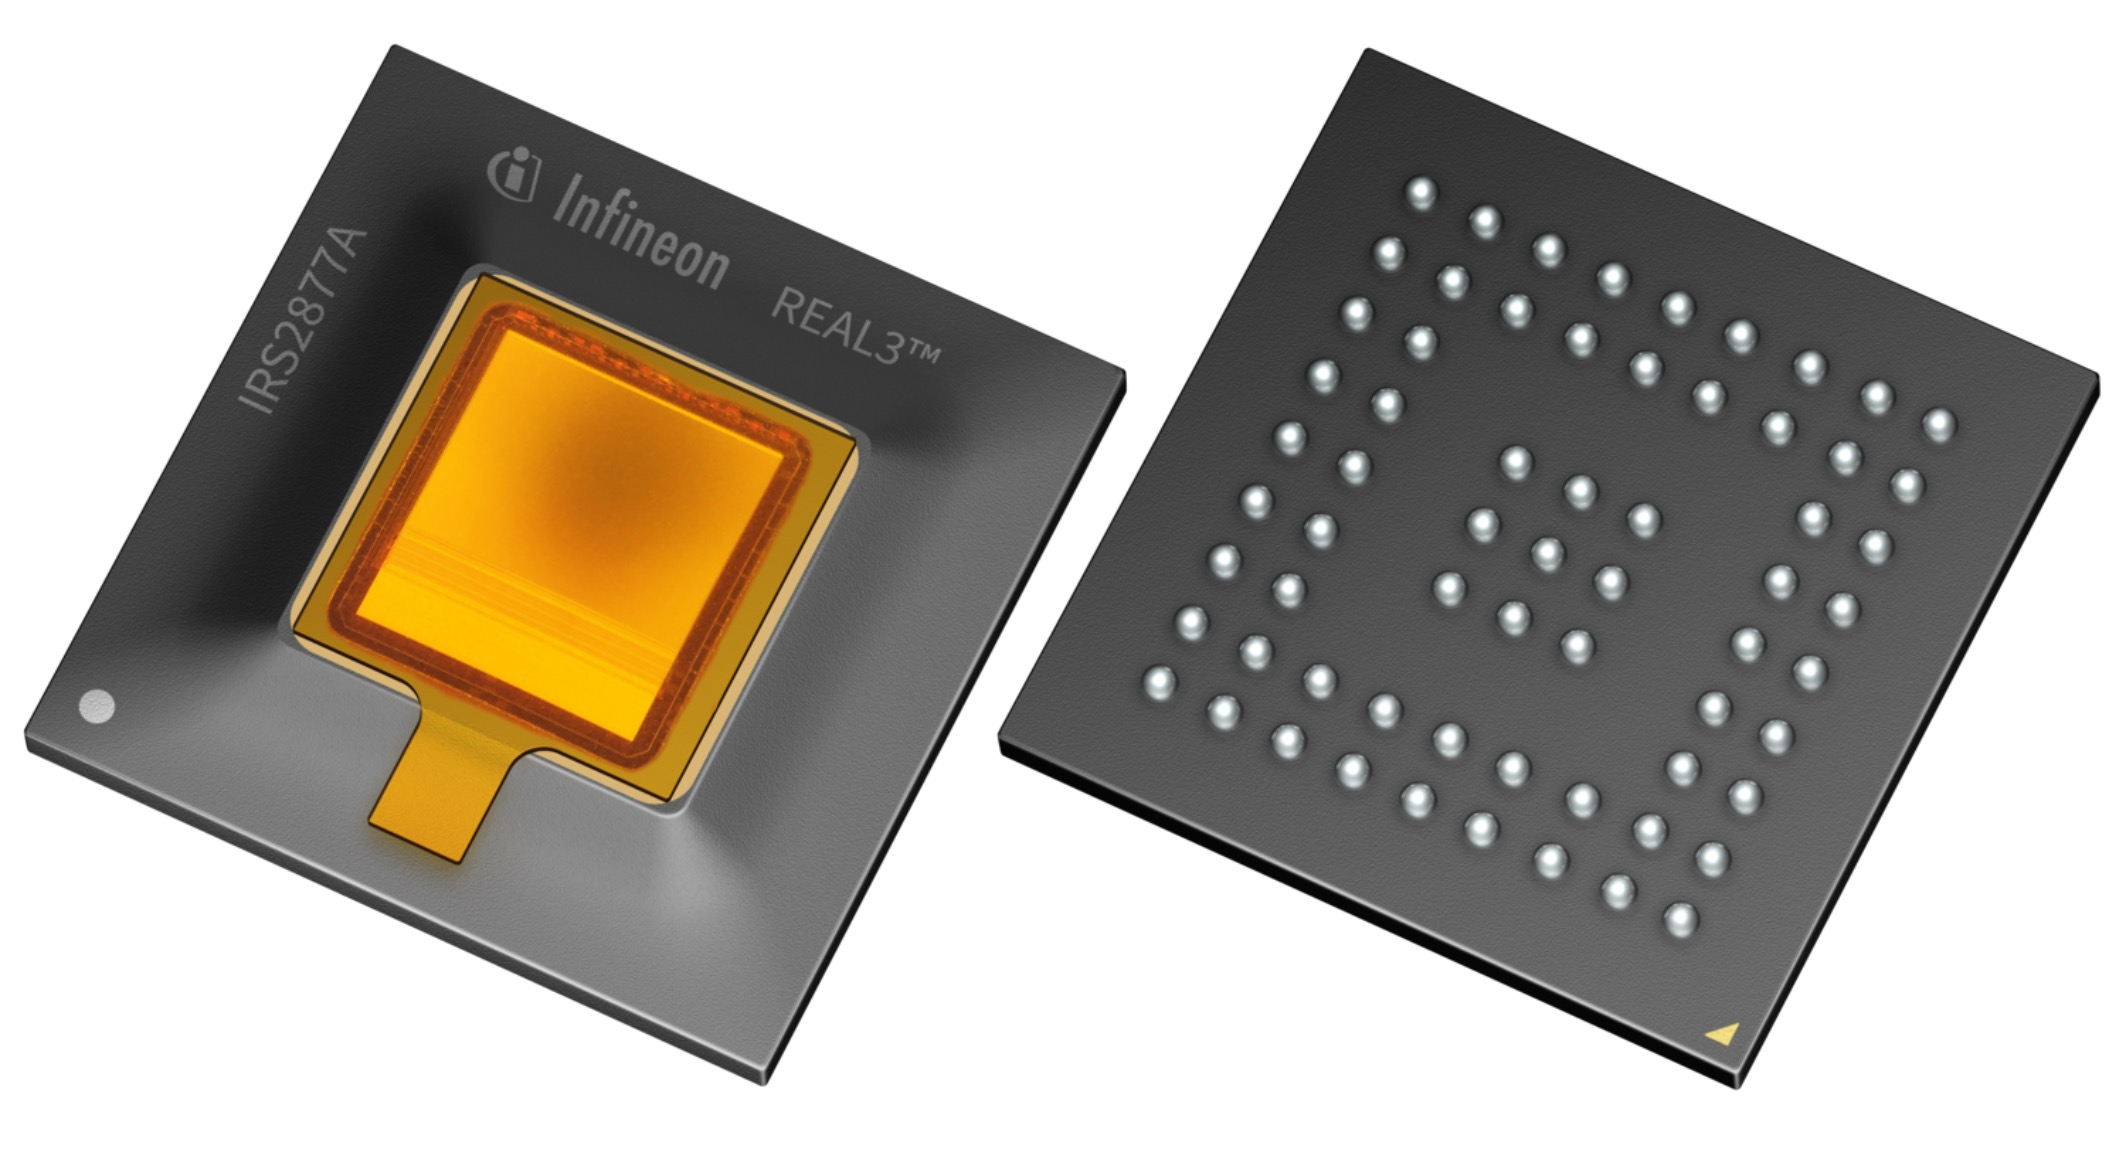 Infineon presents the world’s first ISO26262-compliant high-resolution 3D image sensor for automotive